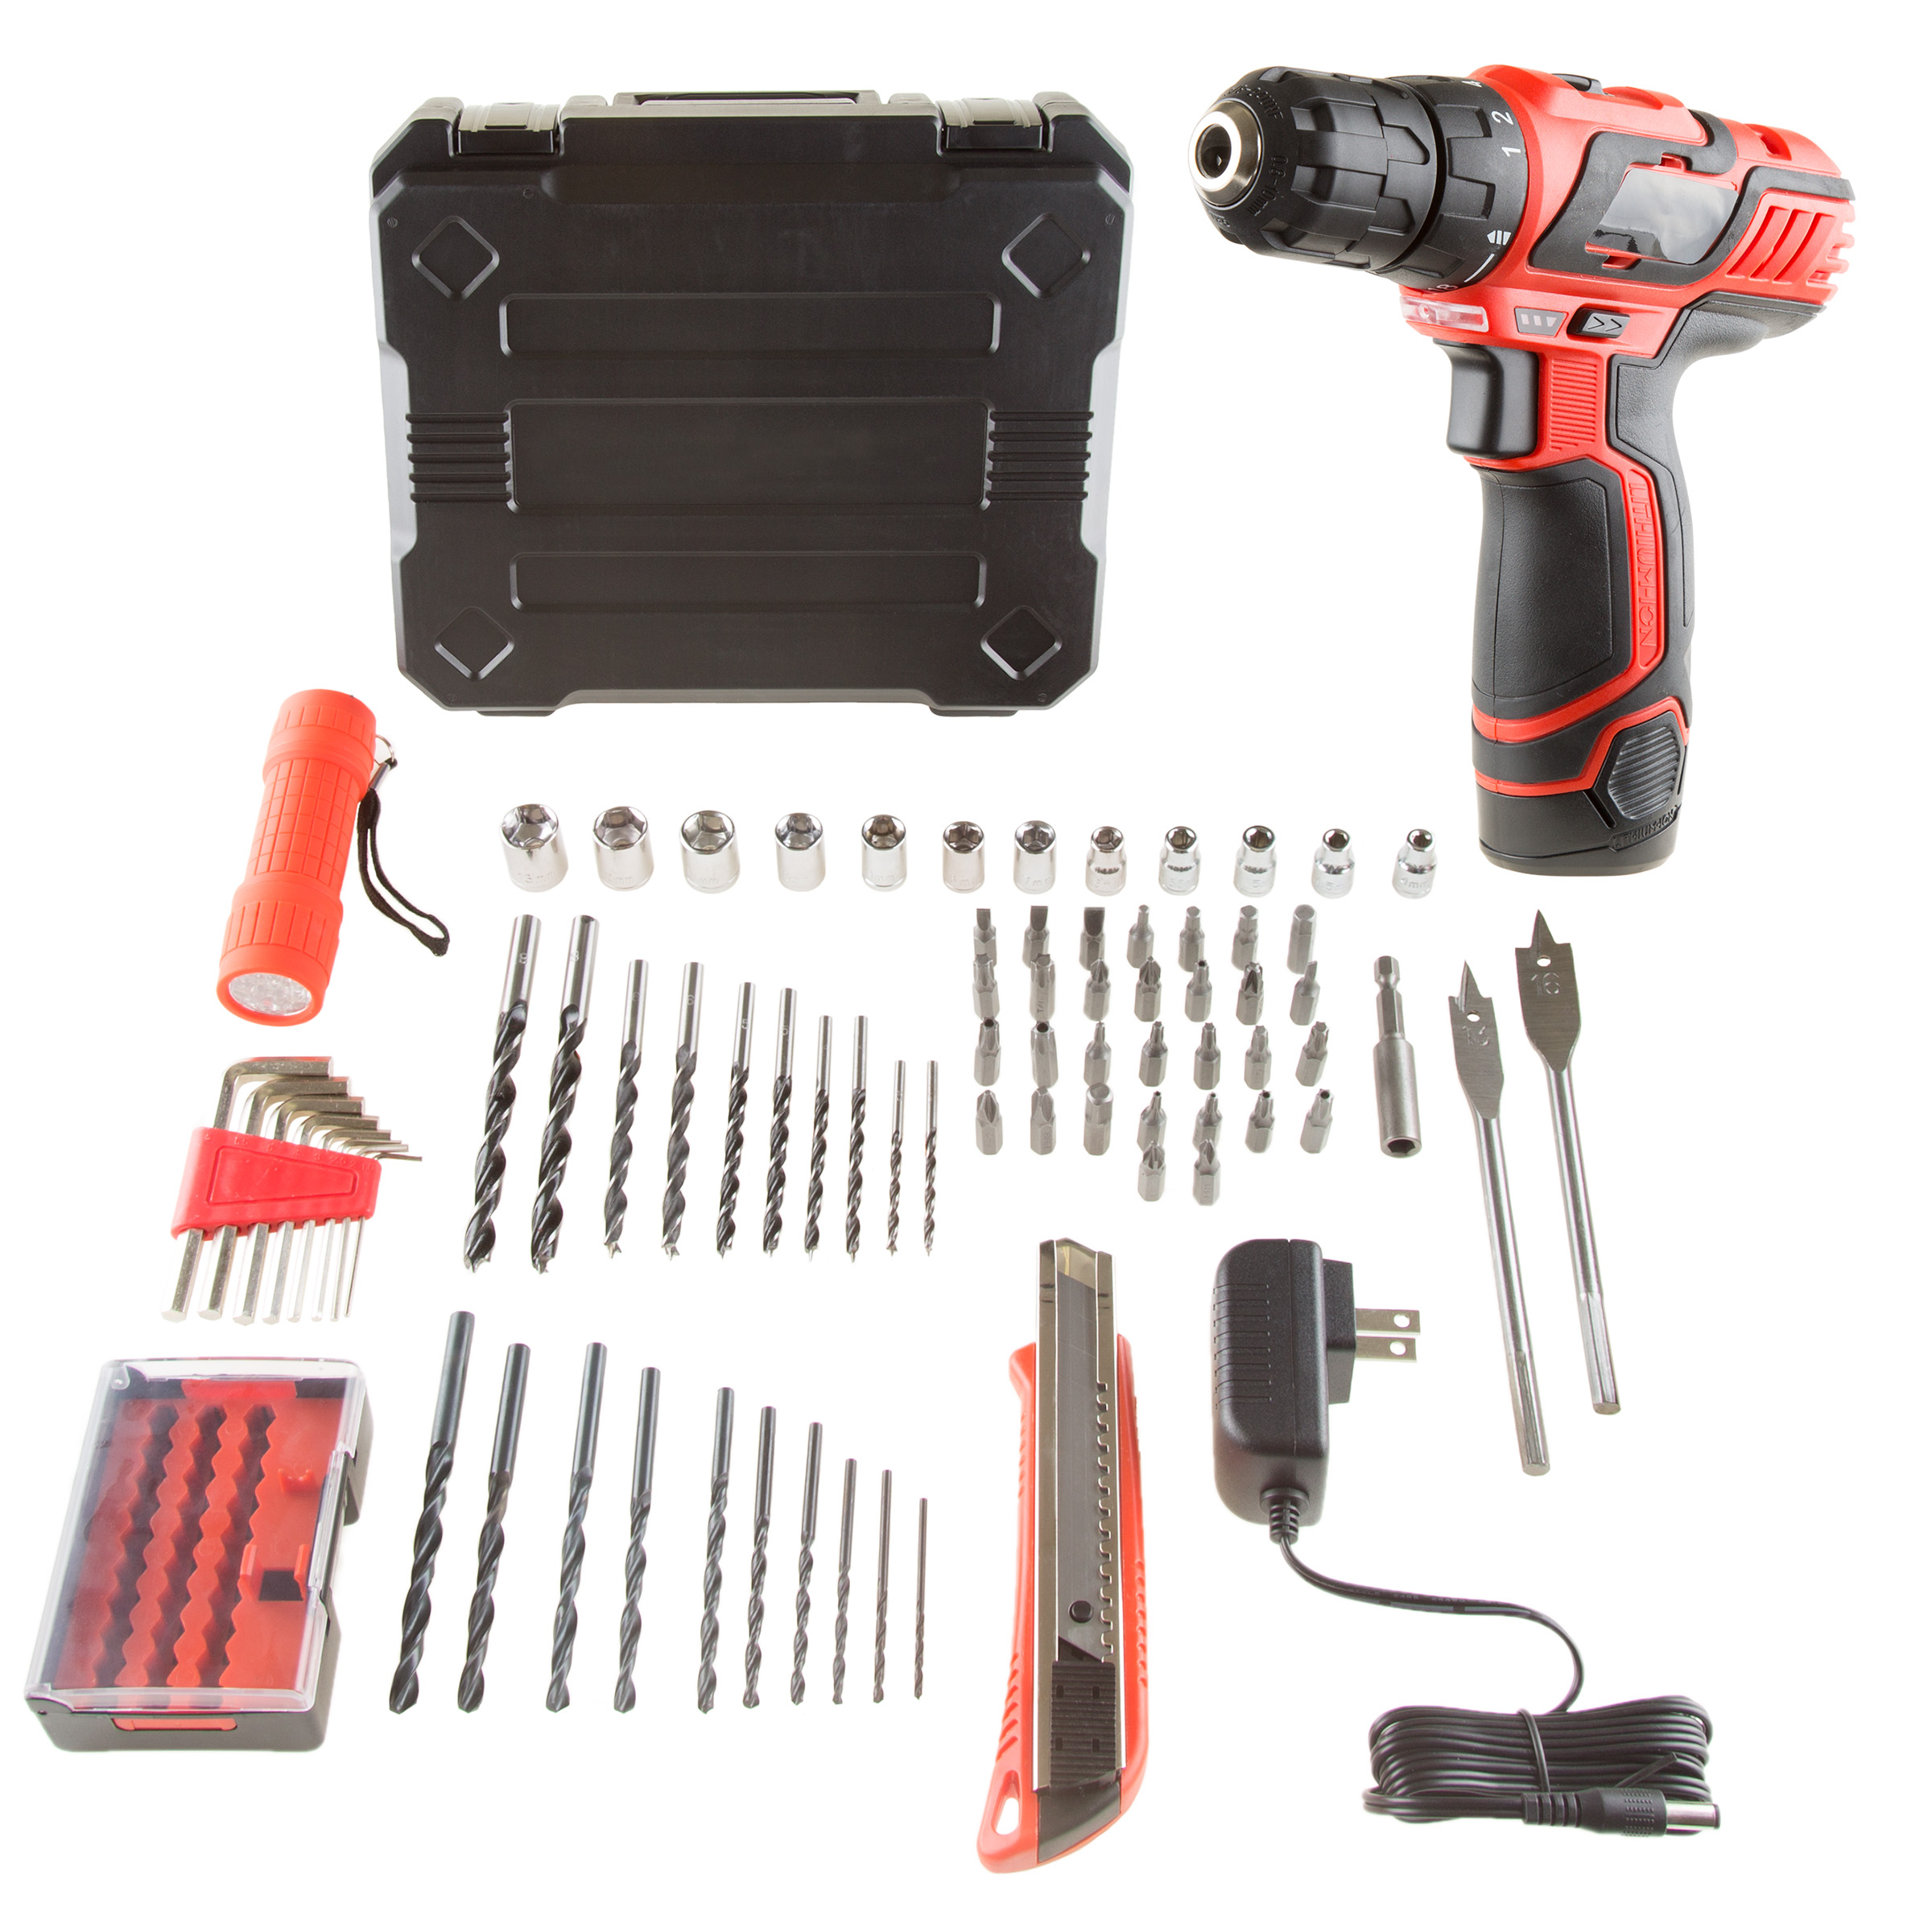 Stalwart 75-Piece 12V Cordless Drill Accessories Set with LED Flashlight - image 1 of 8